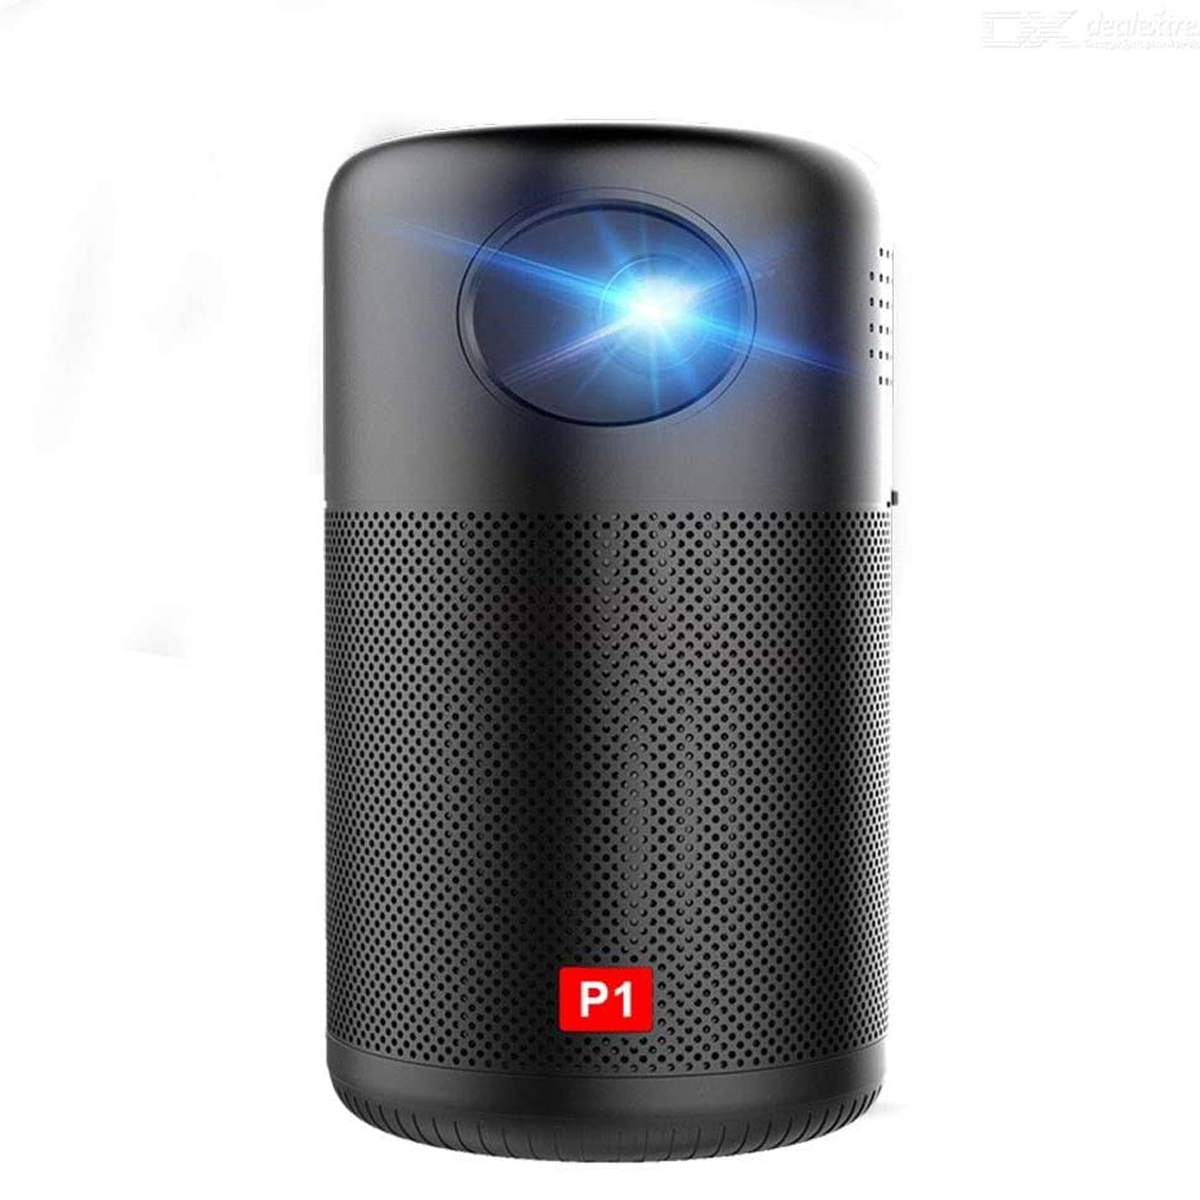 P1 Smart Mini Projector Portable Wi-Fi Projection Device 150 ANSI LM 50-200 Inch